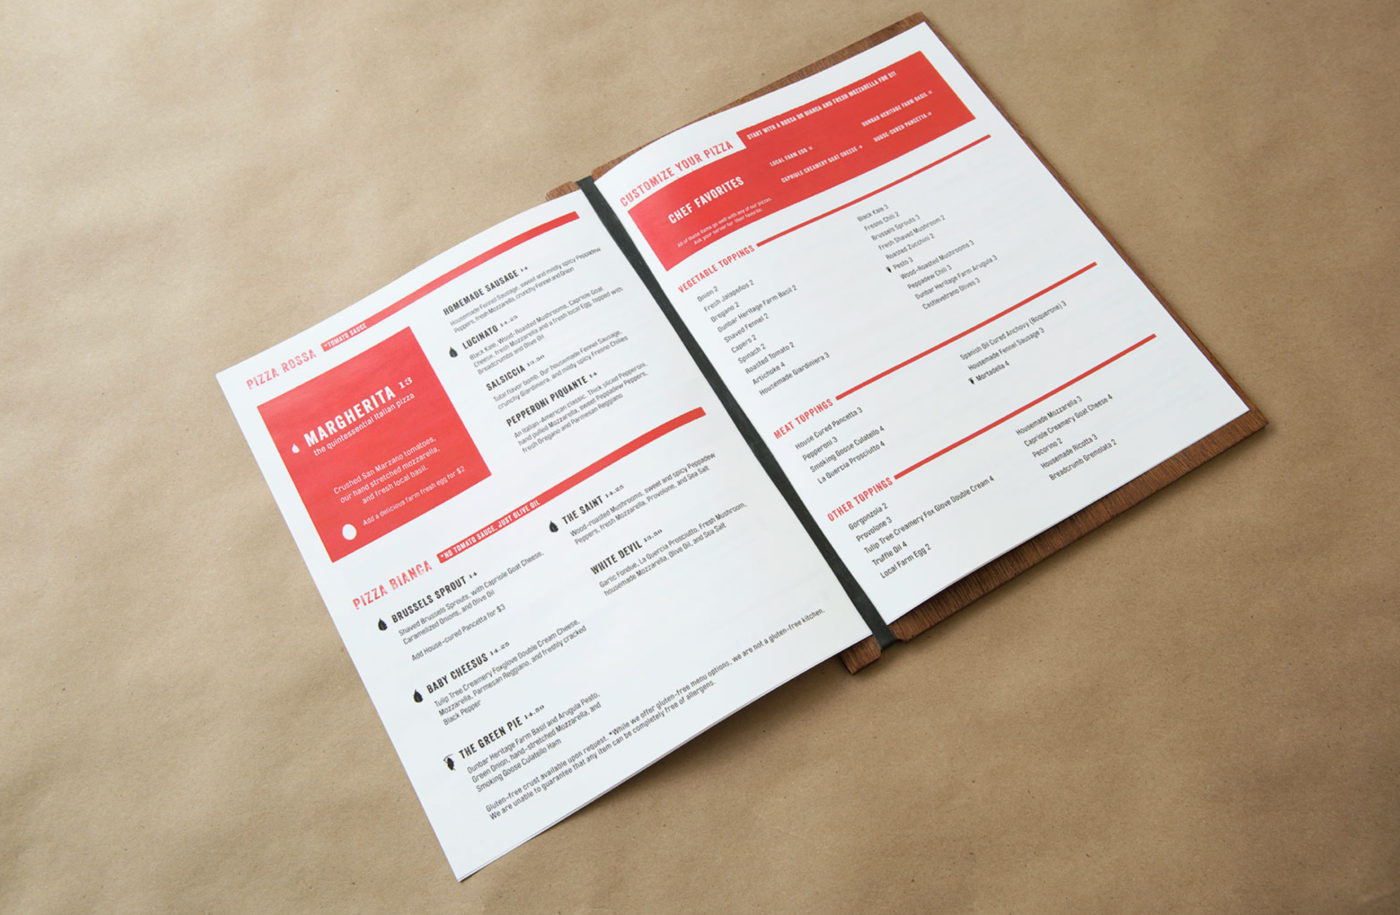 Pizzology Menu Design by CODO Design.